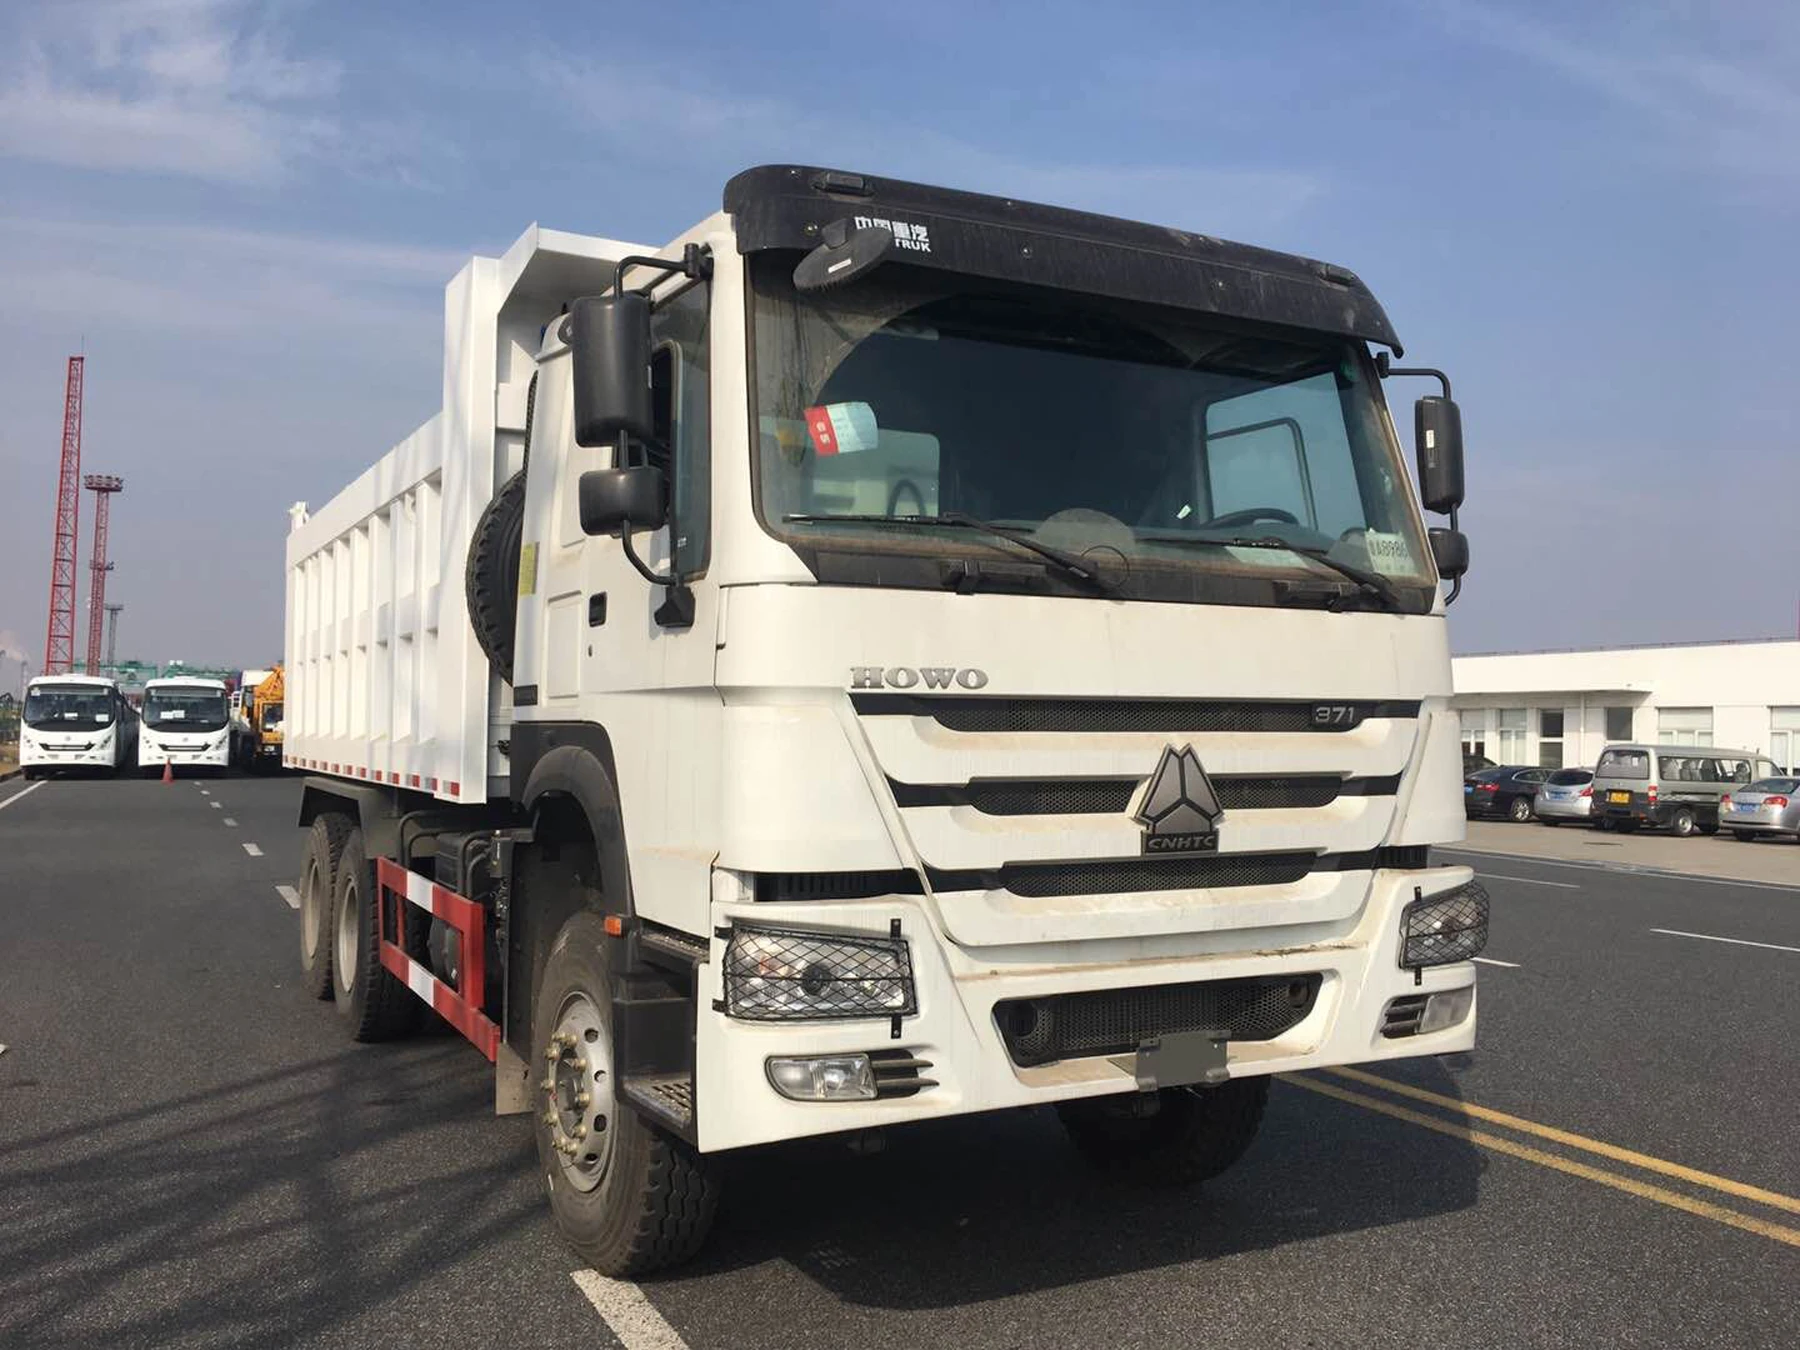 China 2 Units Of Sintruck HOWO Dump Truck Sold To Africa 